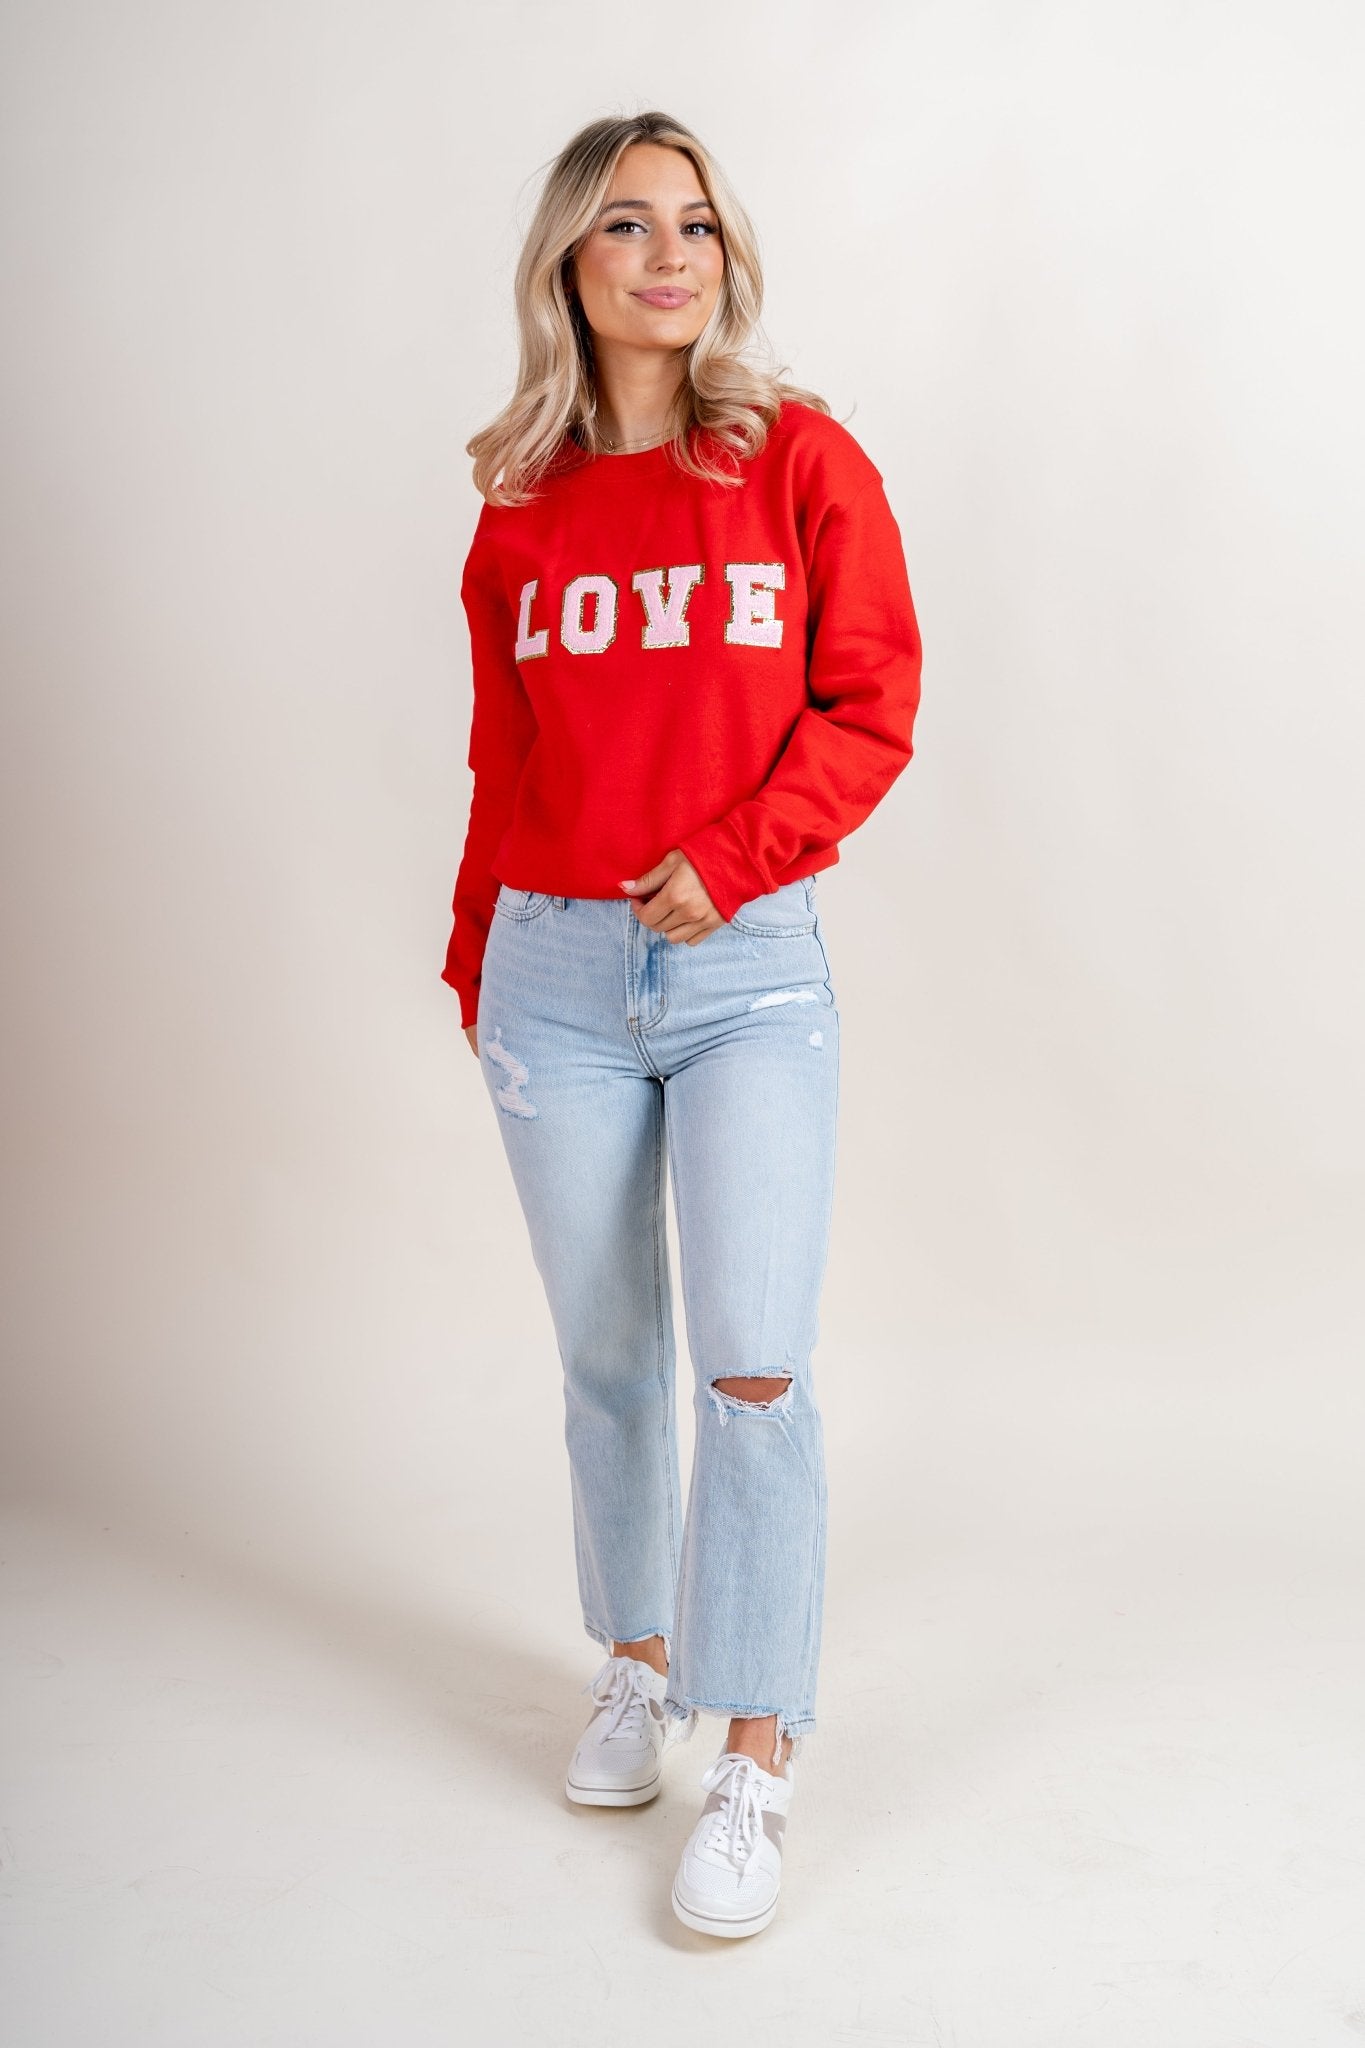 Love patch sweatshirt red - Trendy Valentine's T-Shirts at Lush Fashion Lounge Boutique in Oklahoma City